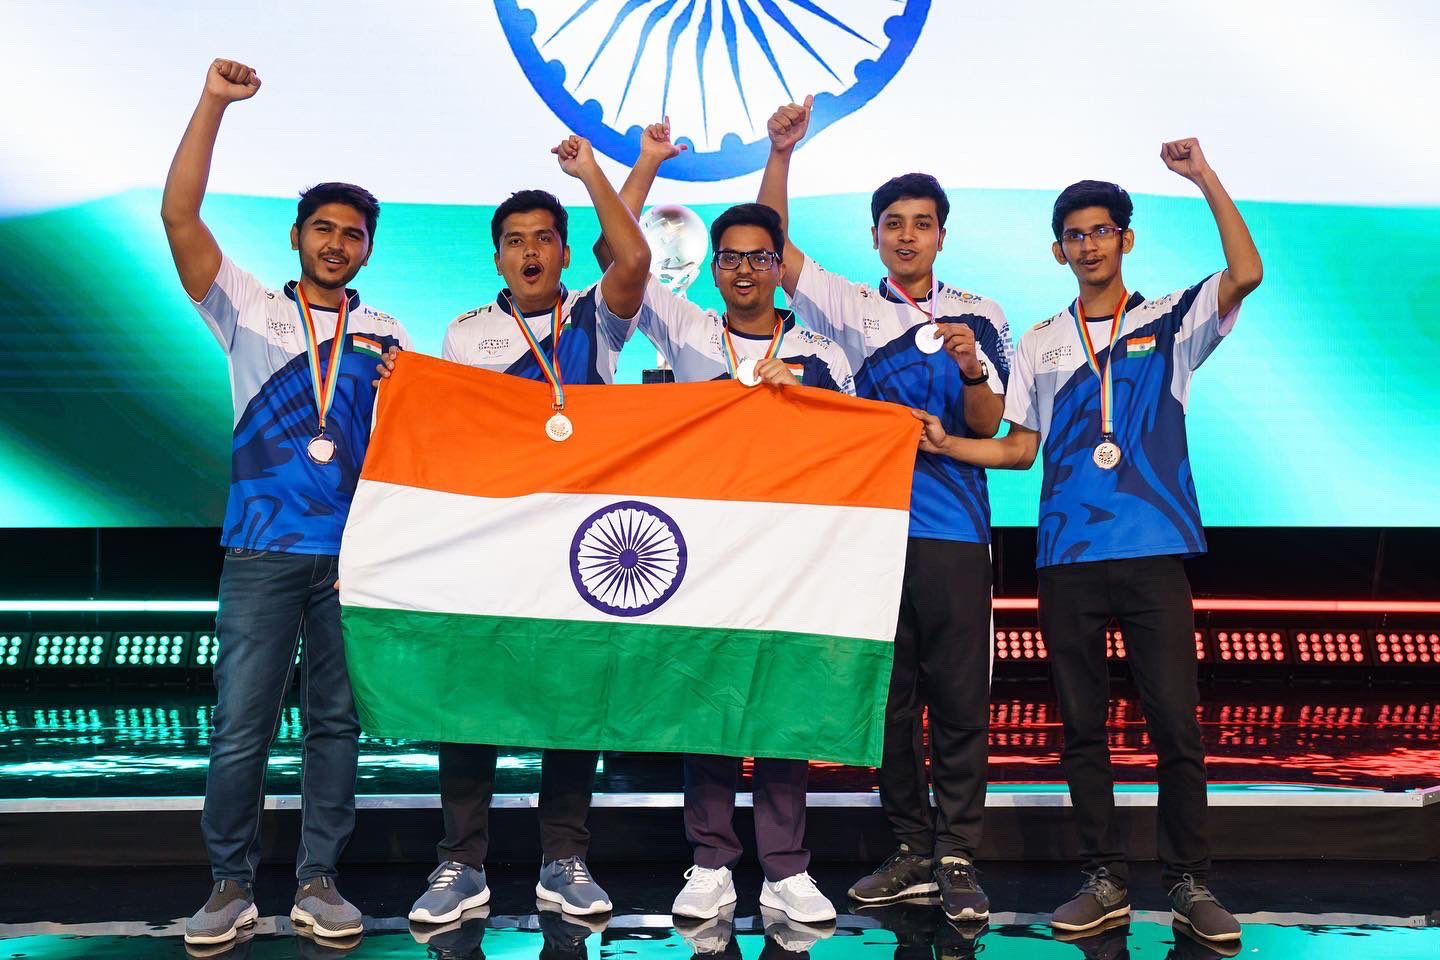 indian-esports-industry-overwhelmed-with-dota-2-team-winning-bronze-medal;-bat-for-esports-recognition-as-a-sport-&-brands-support-for-the-athletes